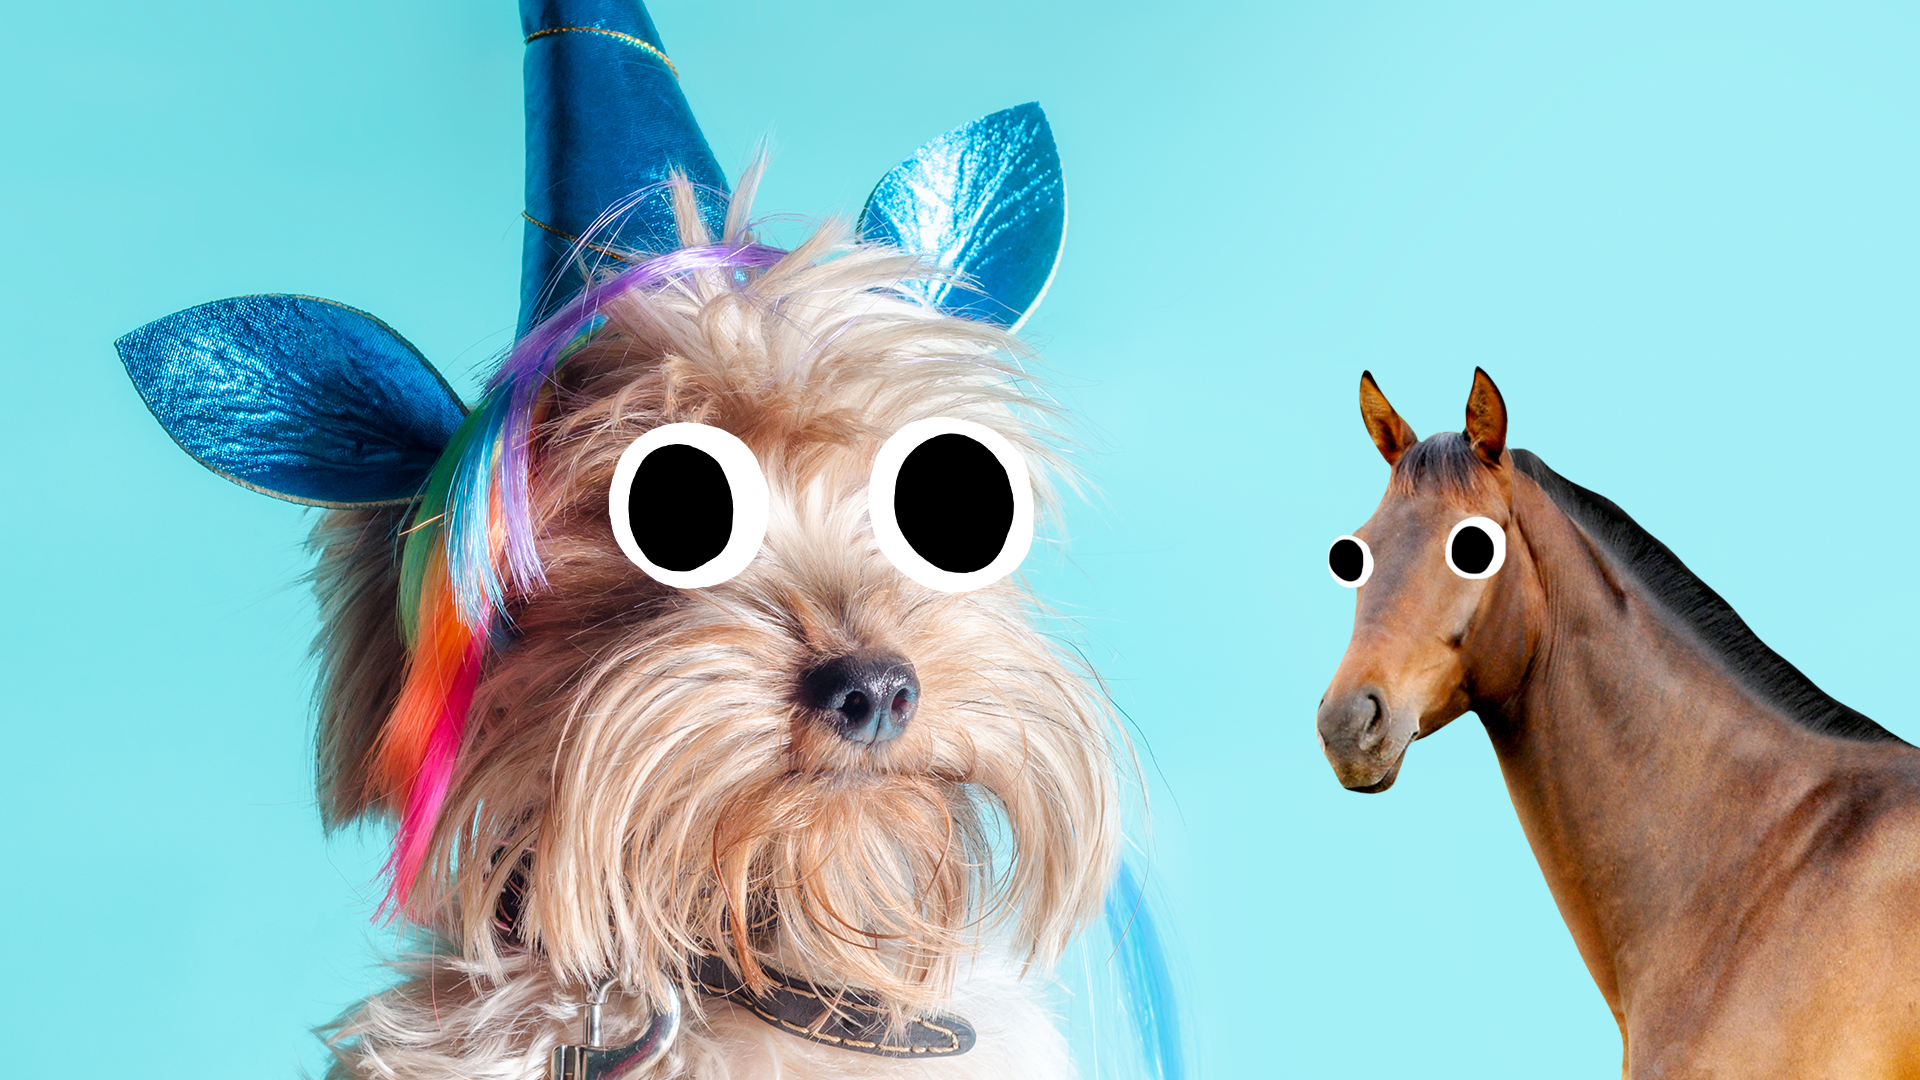 Puppy dressed as unicorn on turquoise background with startled looking horse